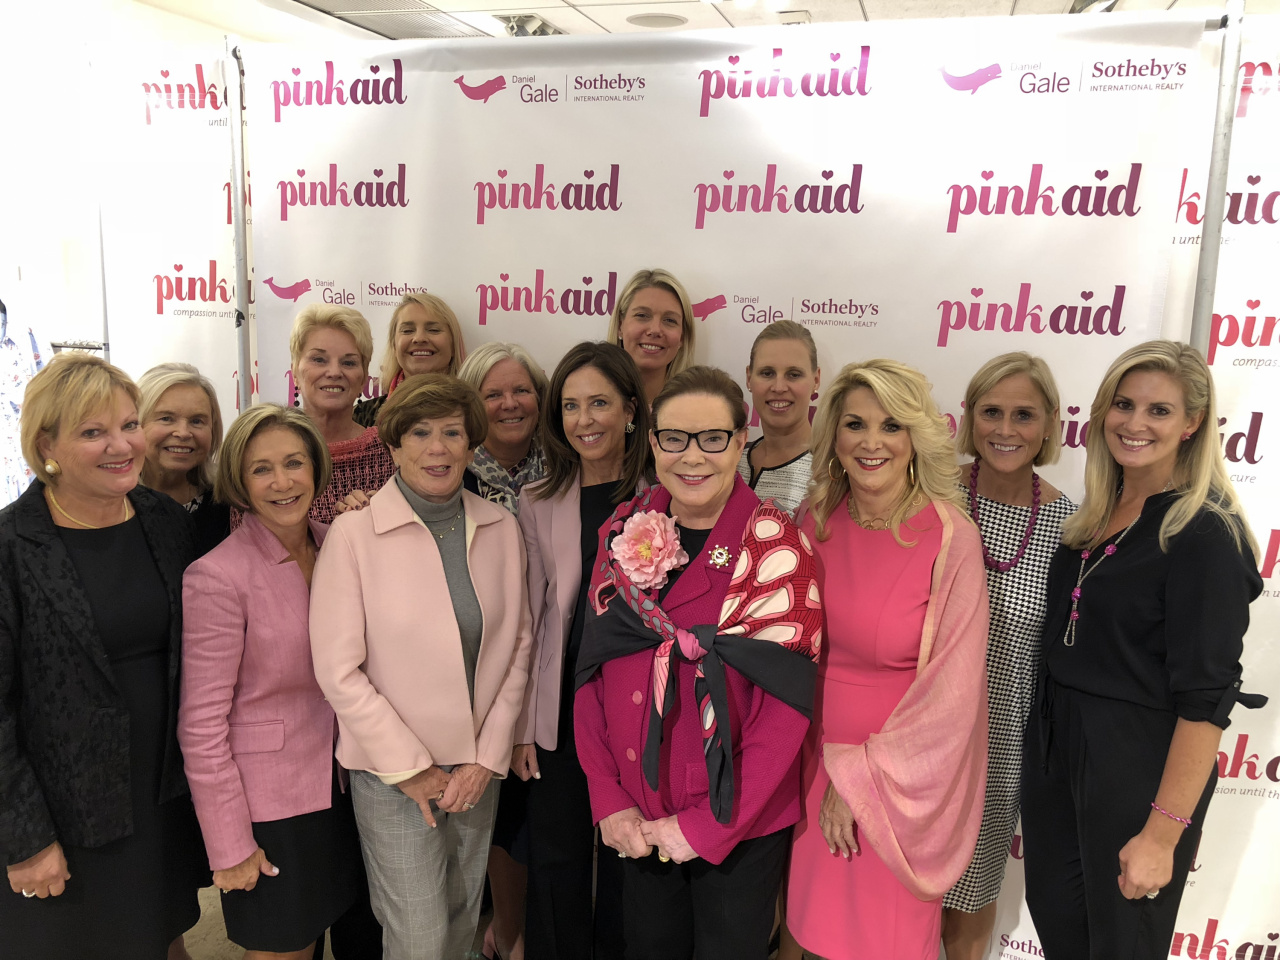 Pictured: Daniel Gale Sotheby’s International Realty was the title sponsor, and President and Chairman Pat Petersen the Luncheon Chair, of the 5th Annual Pink Aid Luncheon and Fashion Show, hosted at Mitchell’s clothing store in Huntington, NY. The event raised more than $500,000 to help underserved local women attain breast cancer diagnostics and treatment with support and dignity. Pictured here with Pat Petersen (front row center with scarf) are her colleagues and fellow supporters (l-r) Susan Poli, Bonnie Williamson, Lee Cunningham, Chief Executive Officer Deirdre O’Connell, Nikki Sturges, Tina McGowan and Quinn Bencivenga. Back row (l-r) Bonnie Devendorf, Diane Anderson, Ellen Hanes, Deborah Hauser, Katherine Cirelli and Marion Weiler.